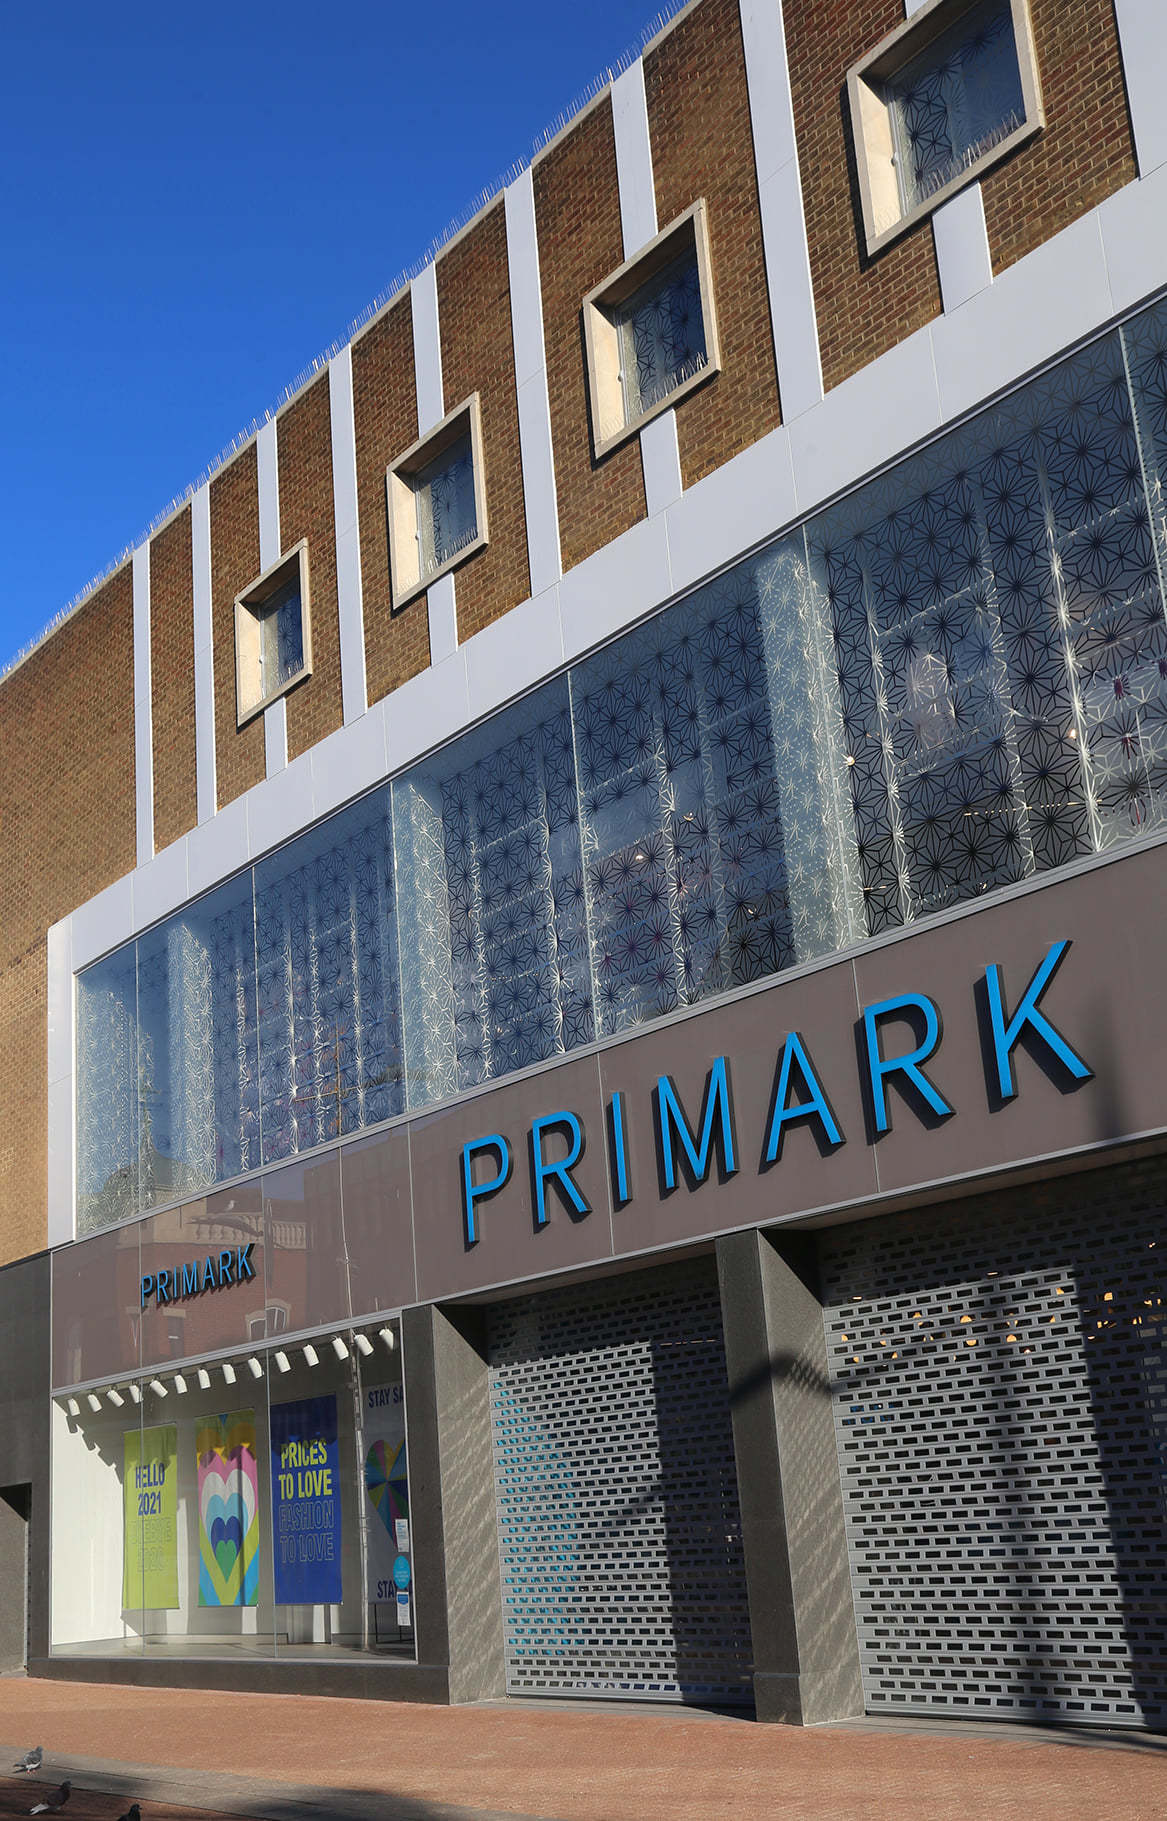 Brand new - Primark took over the former BHS retail space on Southend High Street and opened for the first time last October